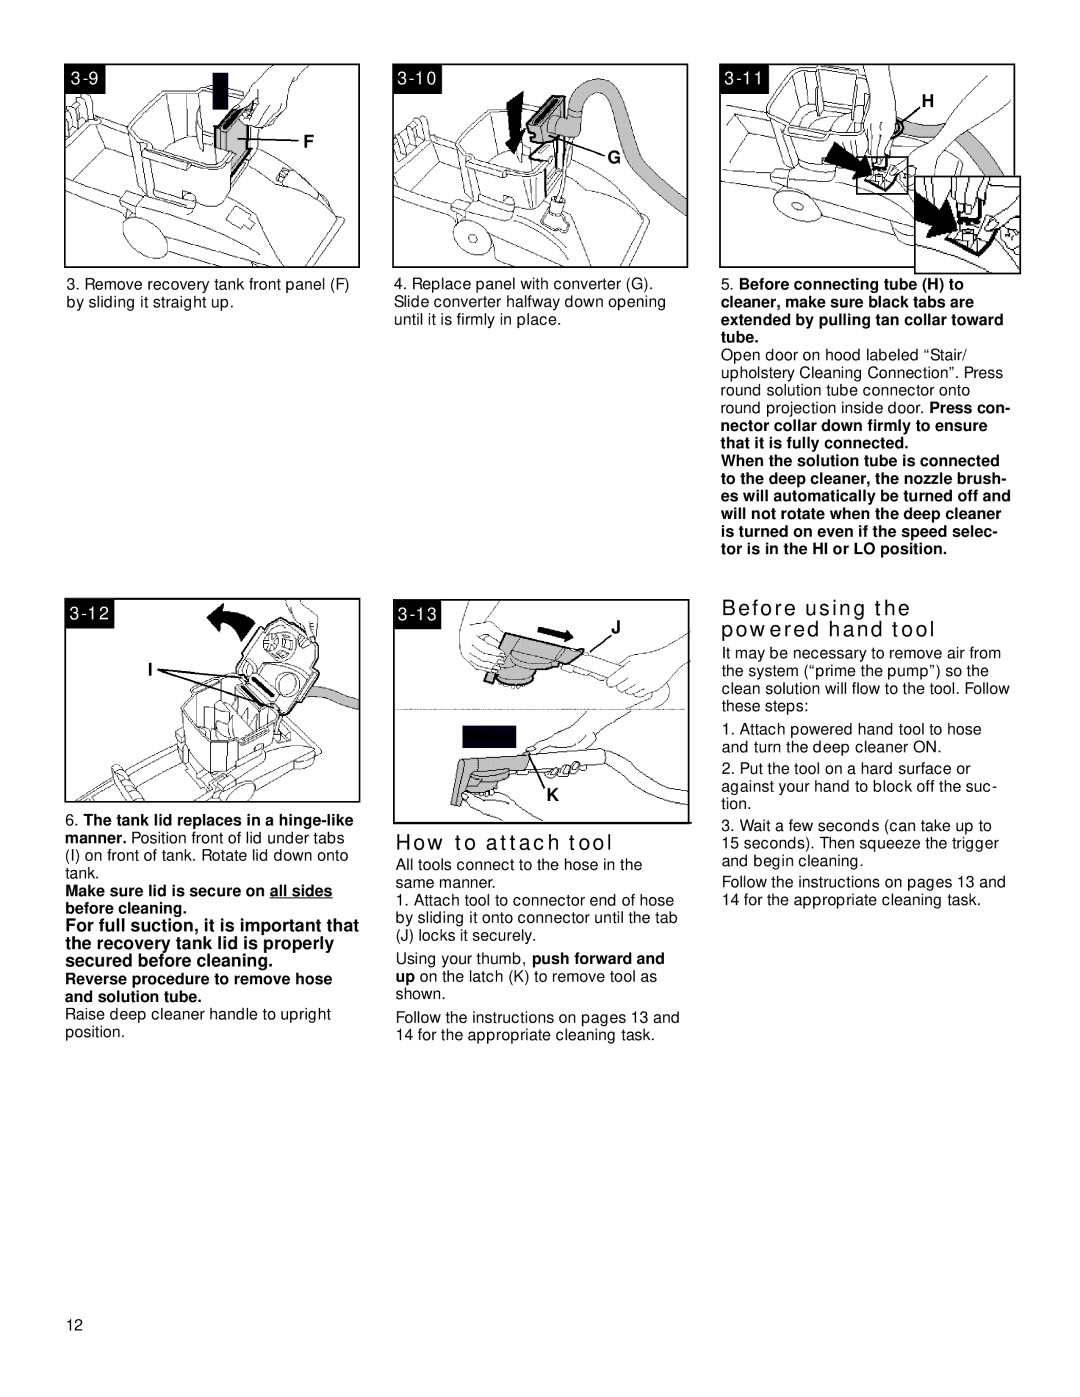 Hoover SteamVacuum owner manual How to attach tool, Before using the powered hand tool 